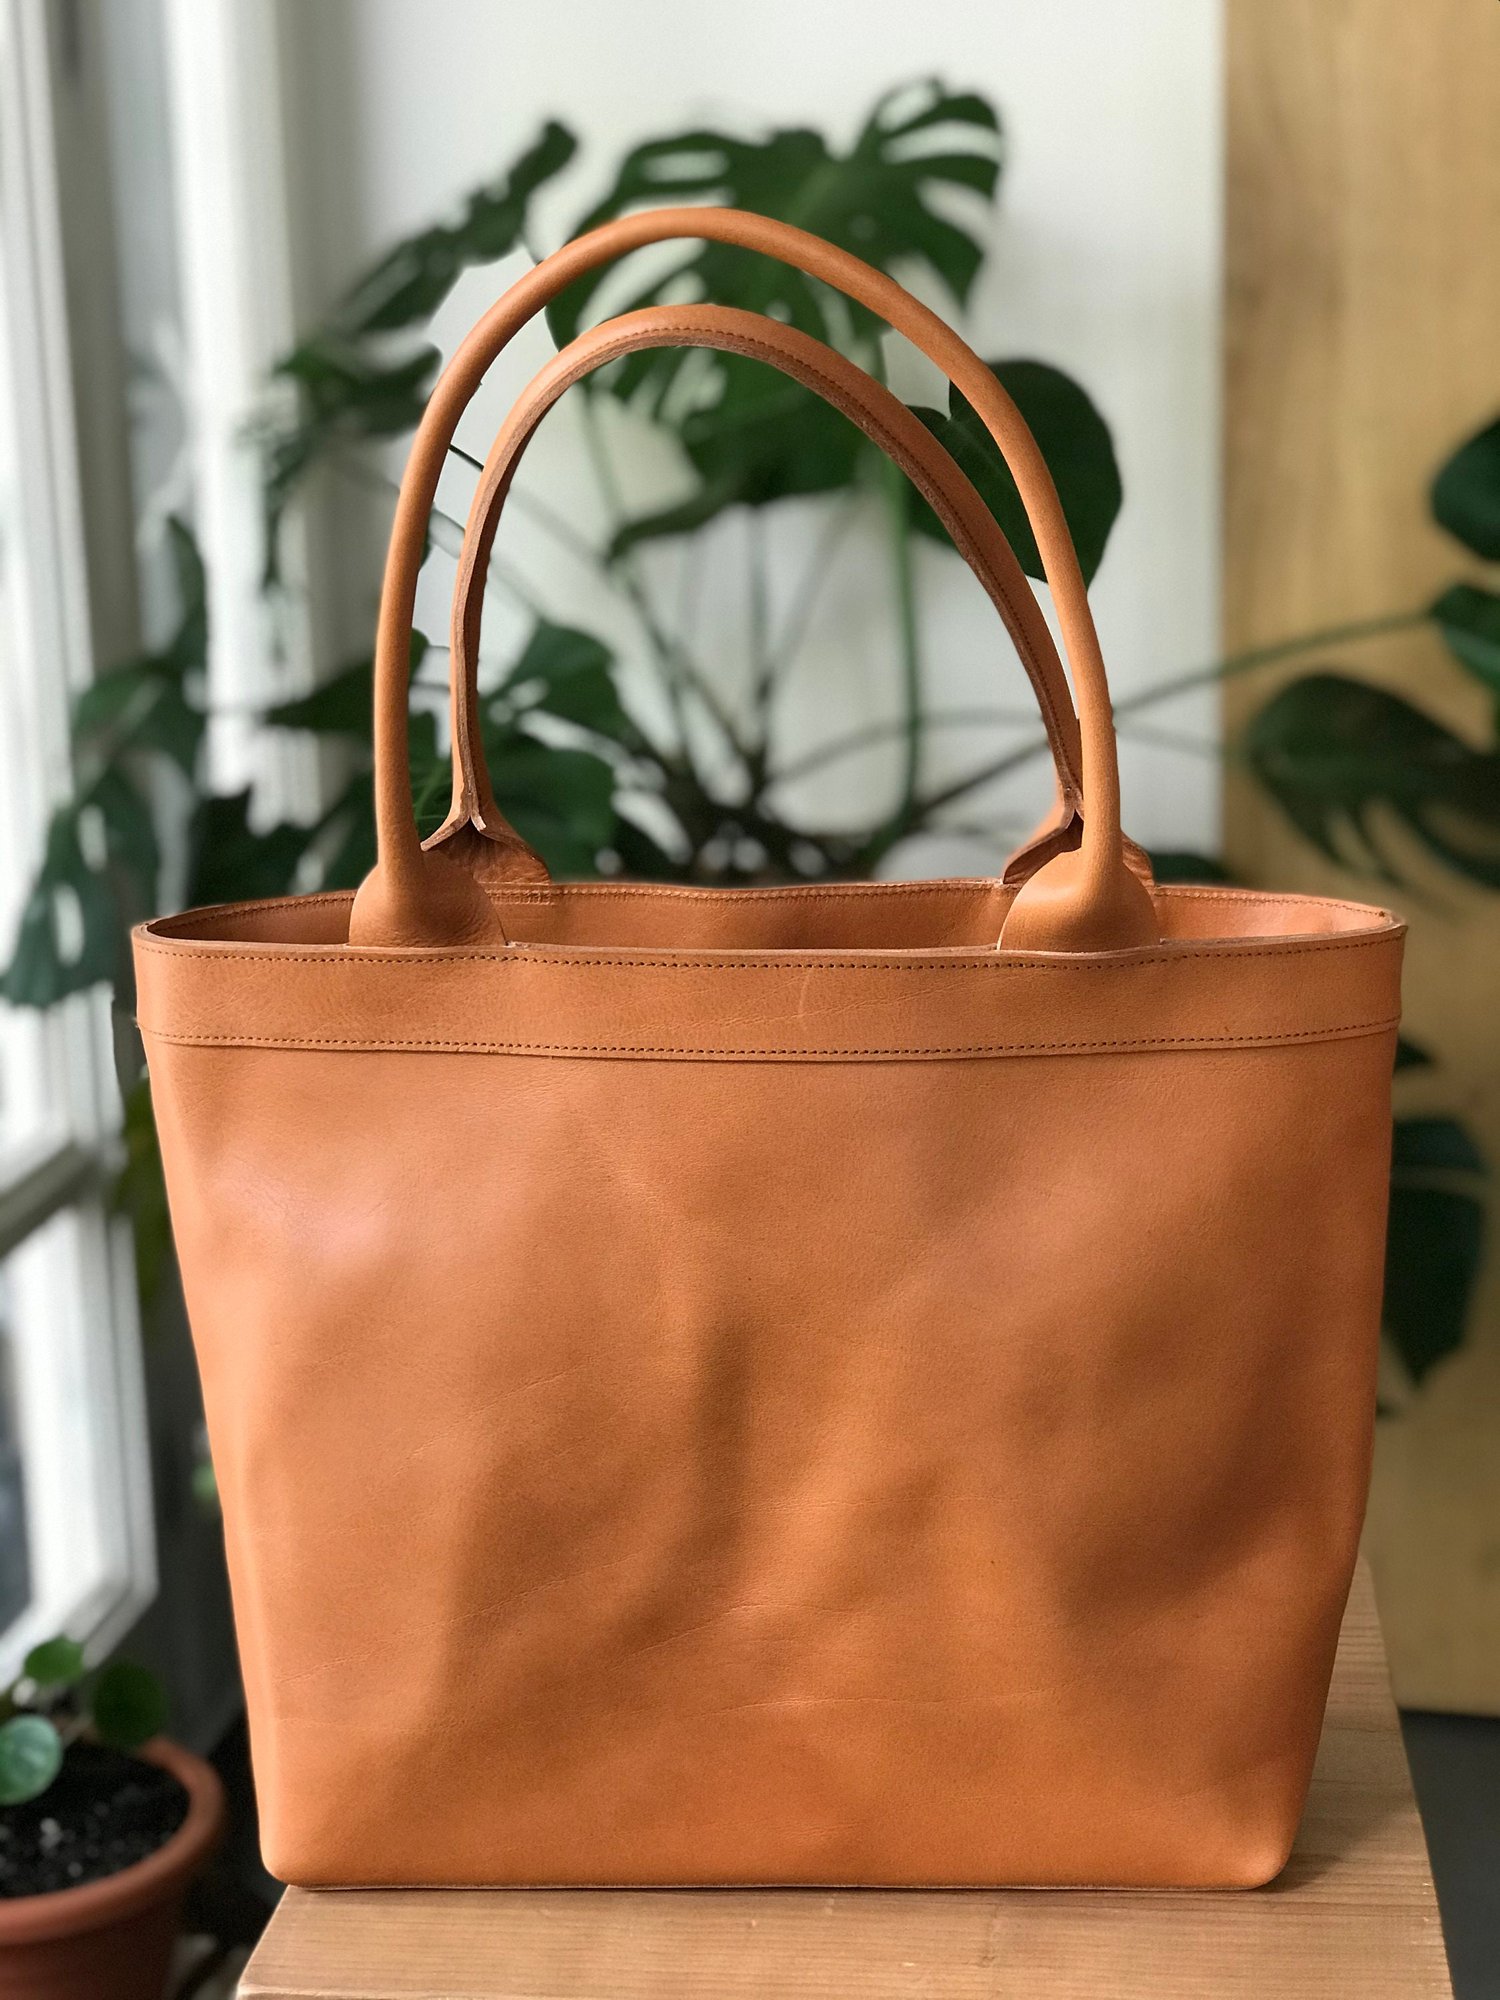 Leather tote bag with zipper and inside lining. Shoulder bag. Camel color  leather. Handmade. — Vermut Atelier